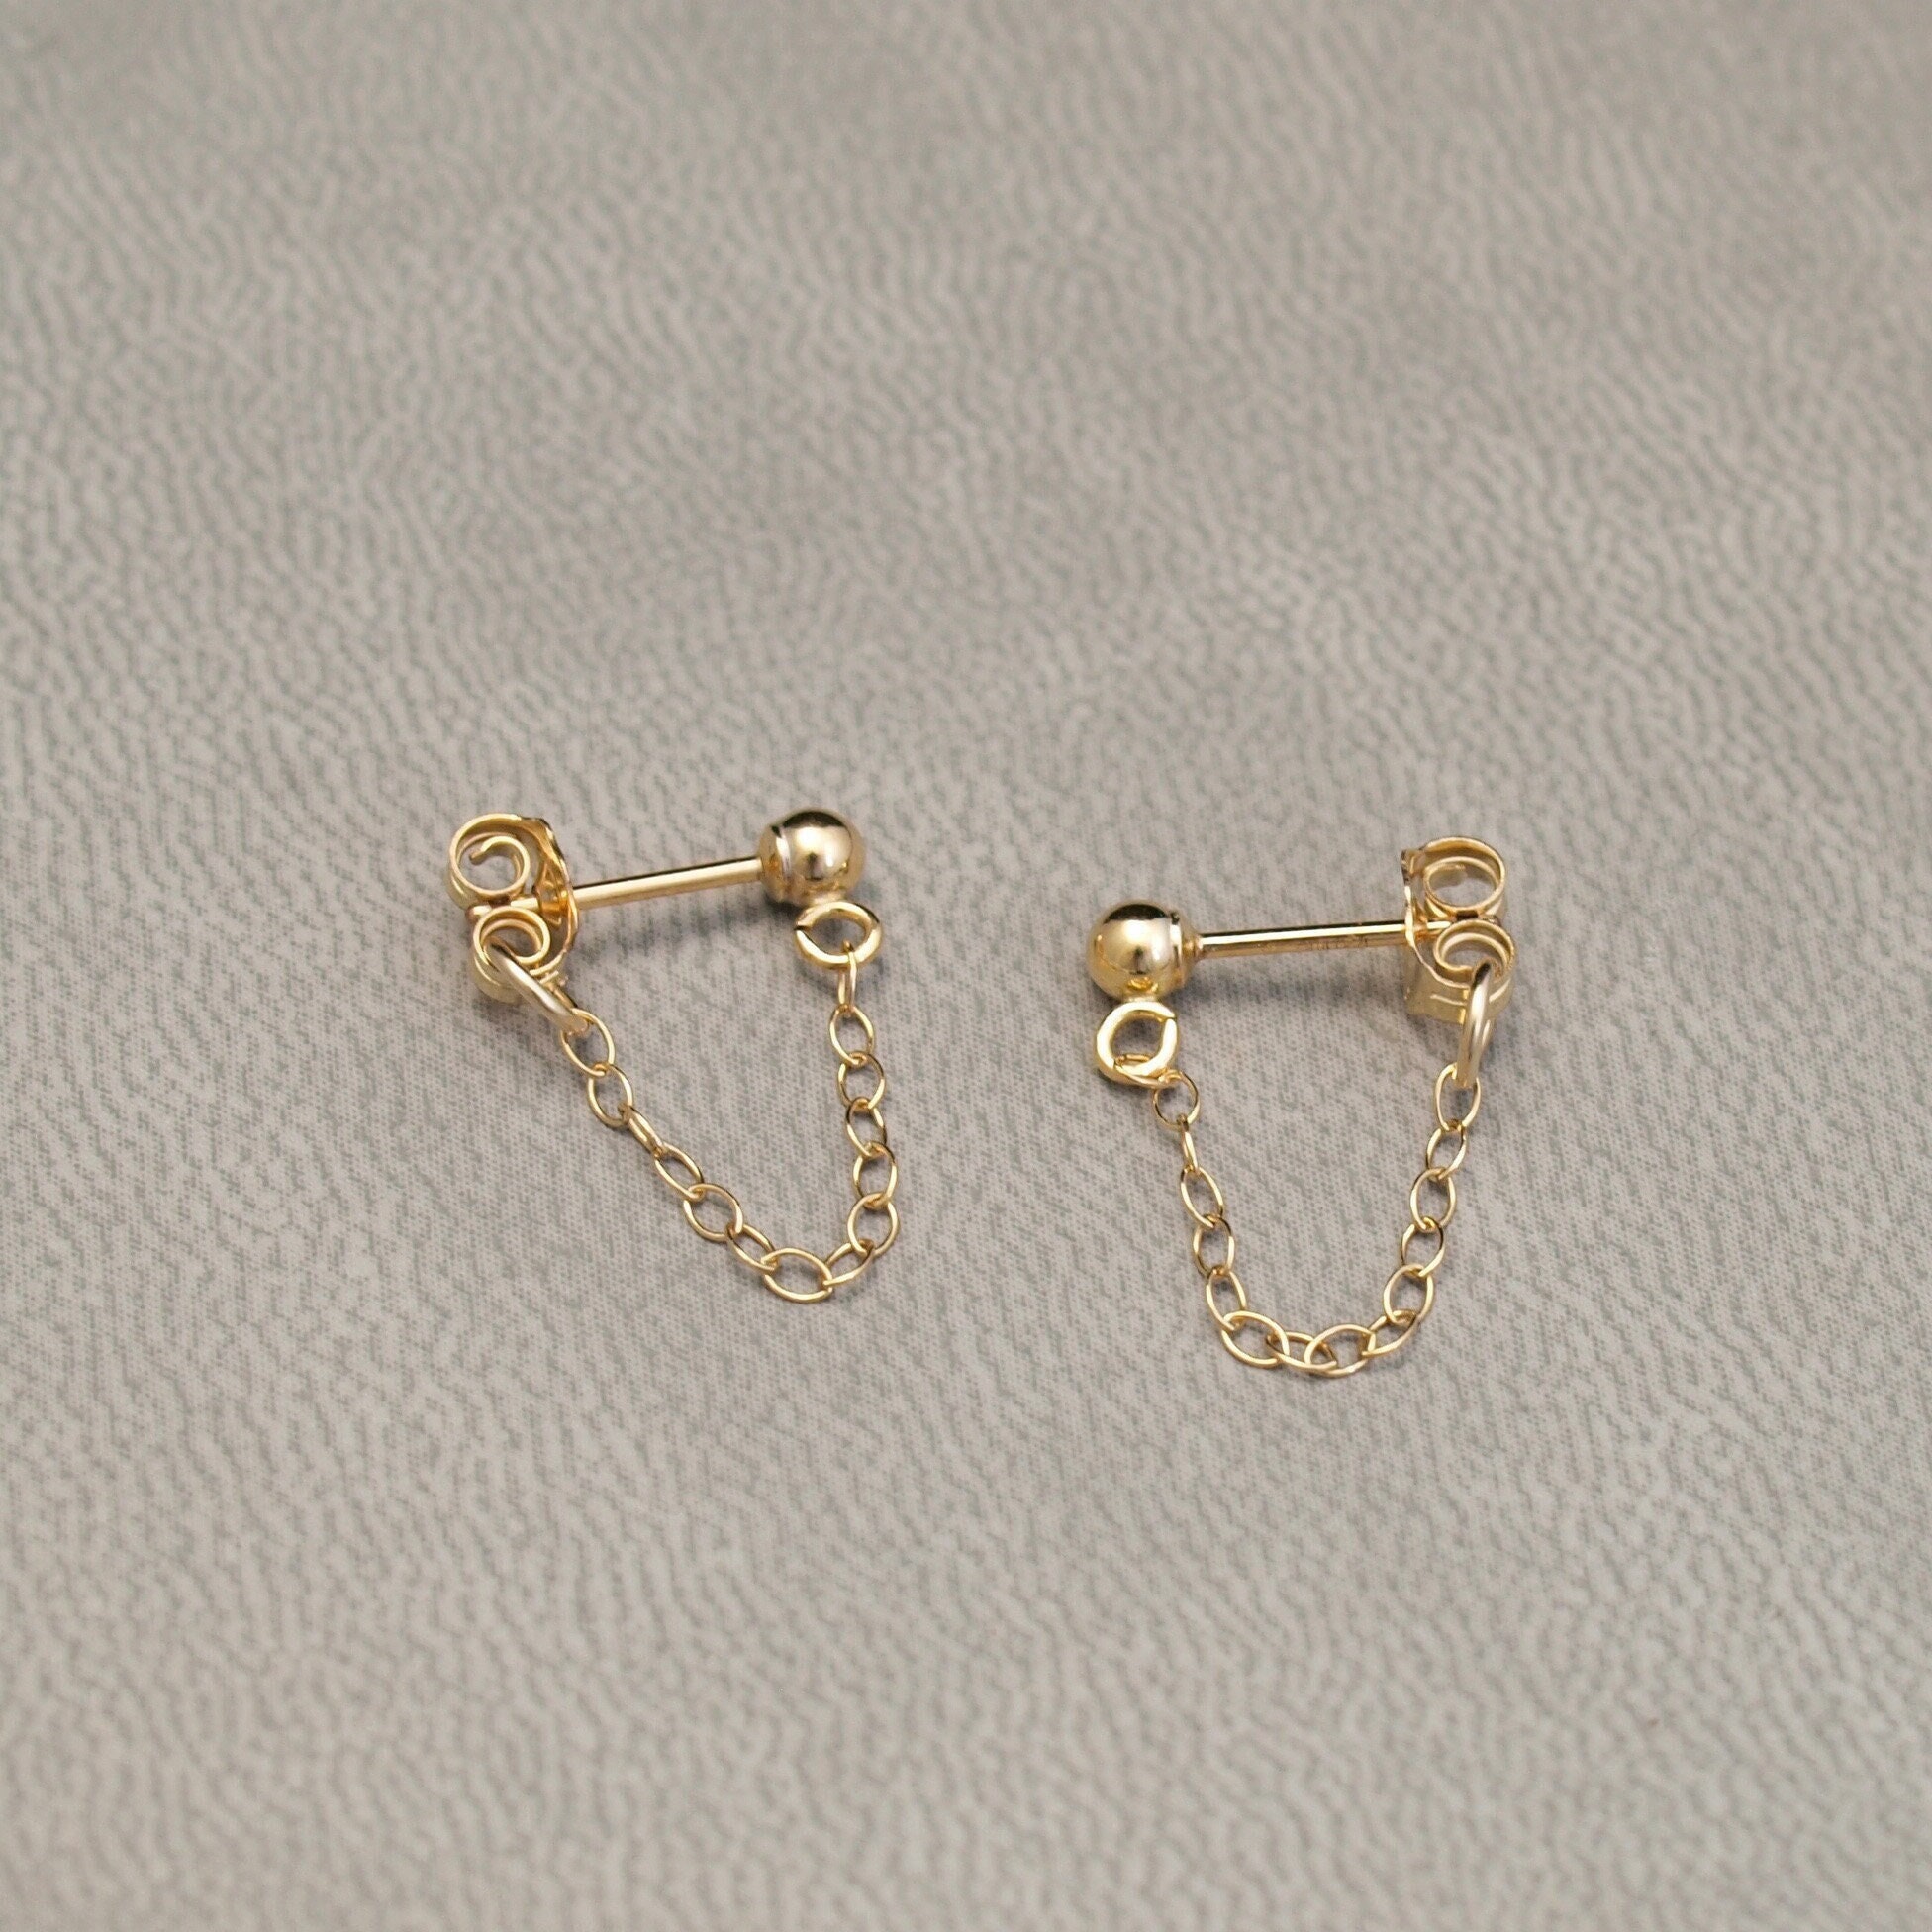 L & T Heirlooms Second Hand 9ct Yellow Gold Scrollwork Citrine Stud Earrings  at John Lewis & Partners